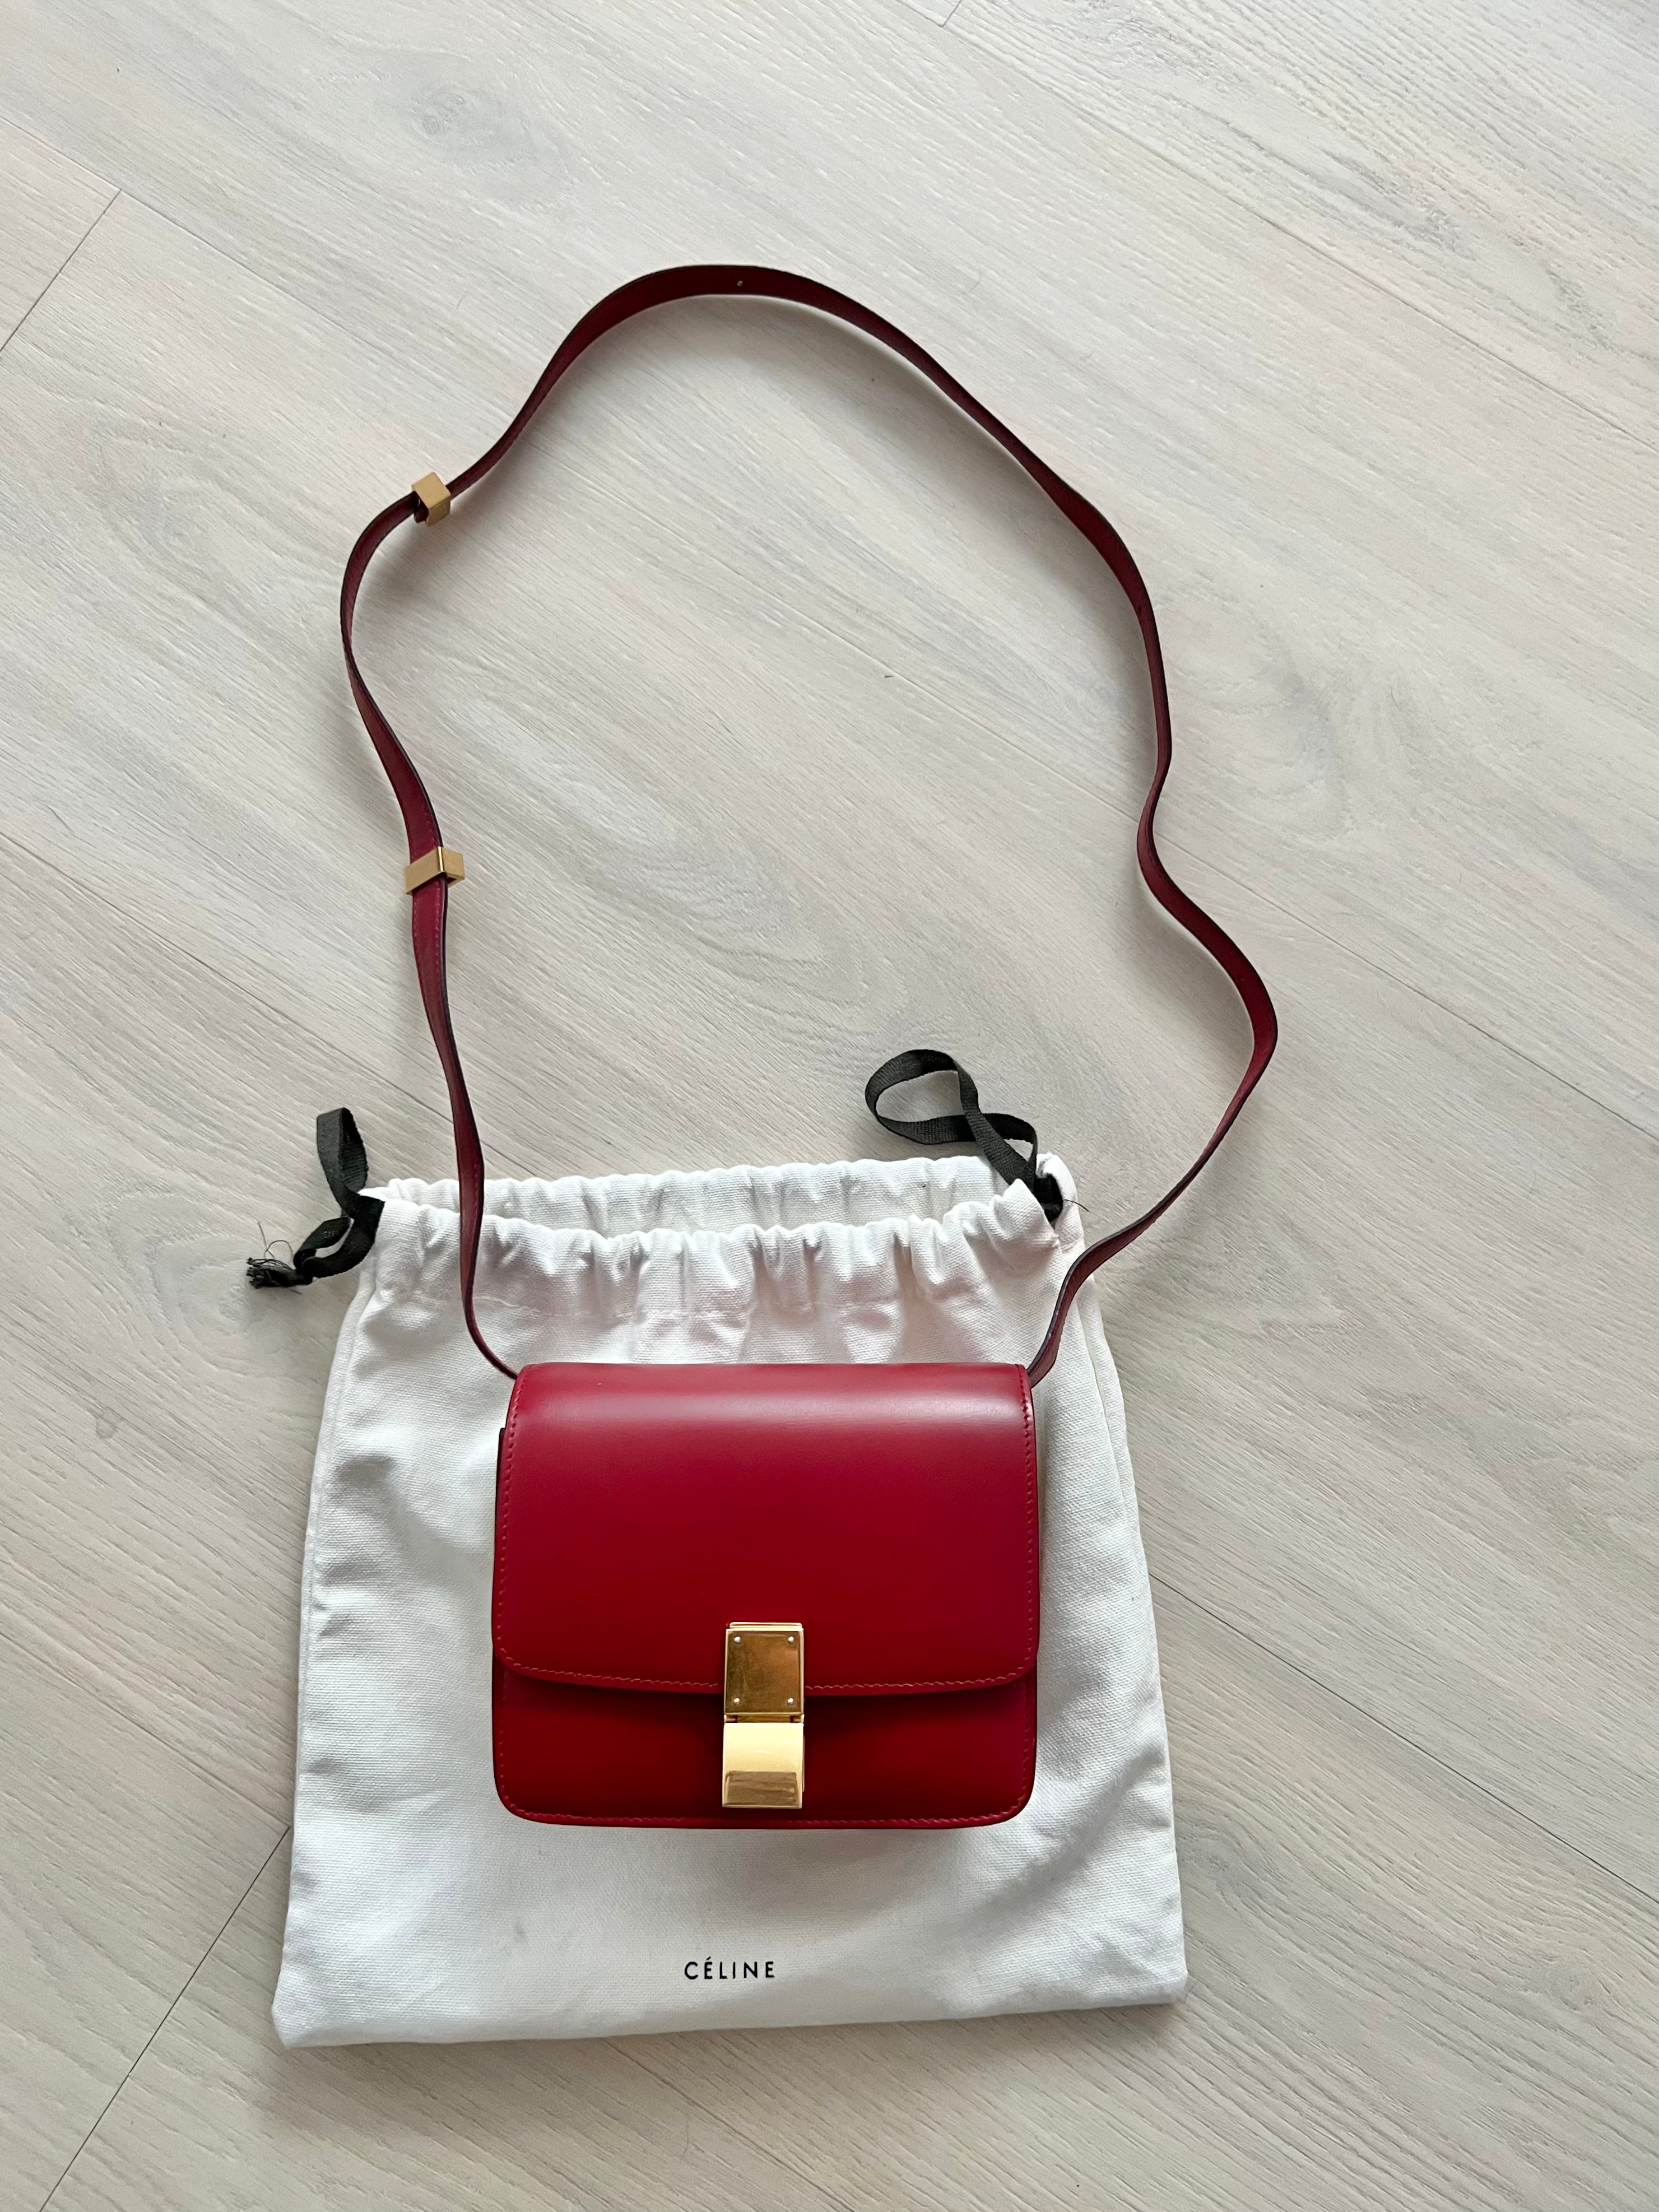 Céline Medium Classic Bag in Box Red - Bags | Second Chance - Preloved  Designer Bags